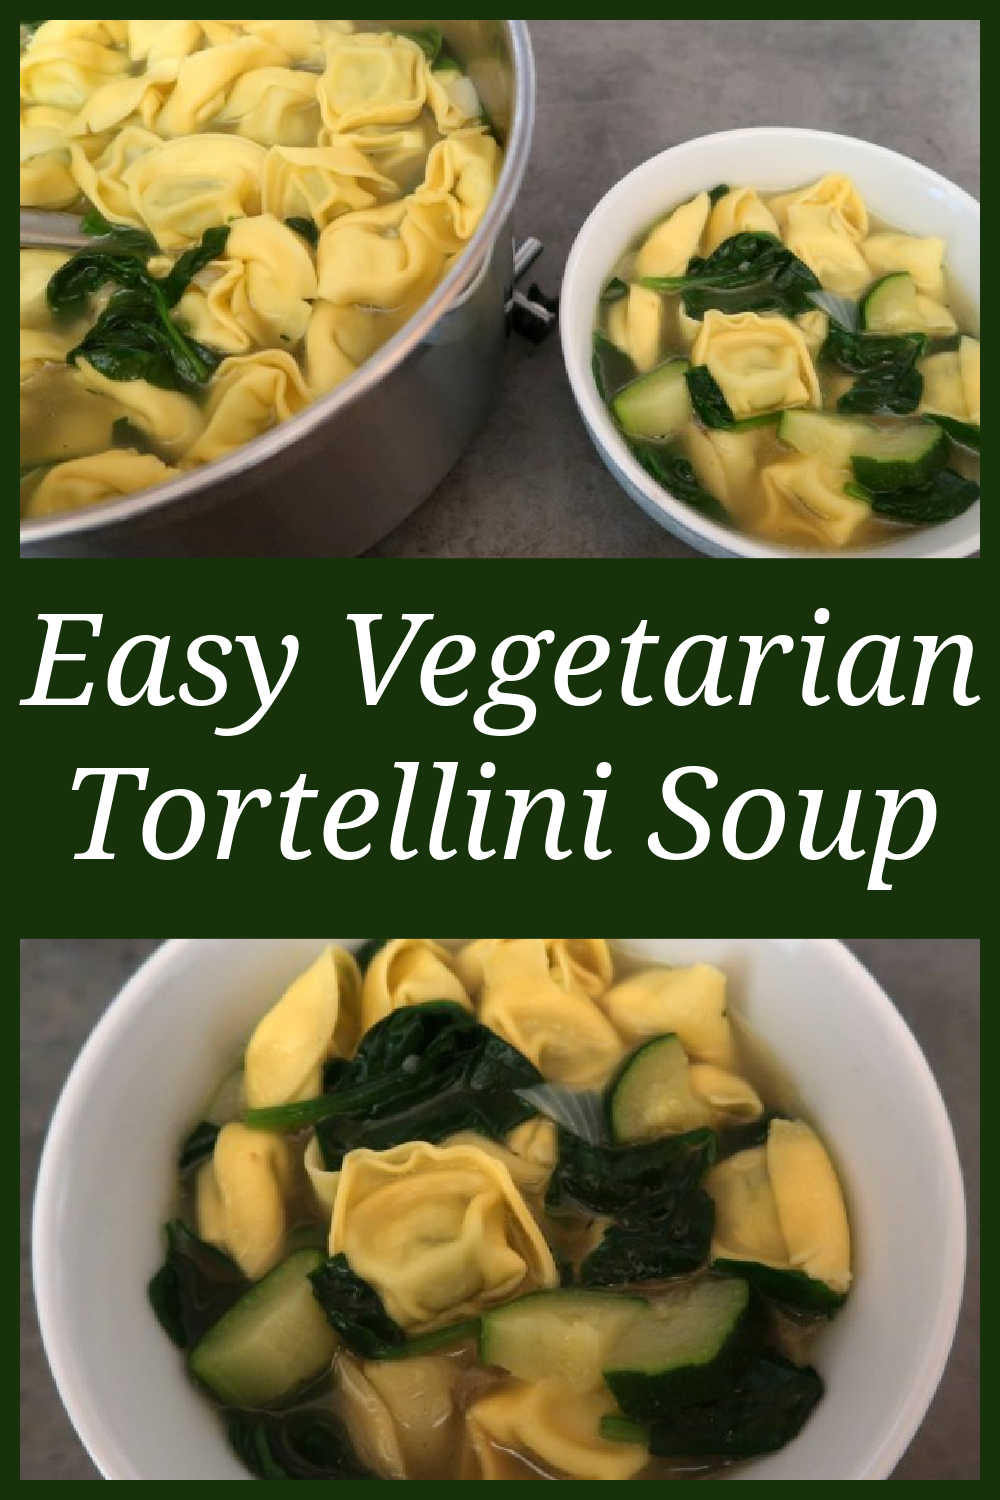 Vegetarian Tortellini Soup Recipe with spinach and zucchini - easy and creamy budget friendly one pot vegetable meal recipes - perfect dinner on a cold winter night.